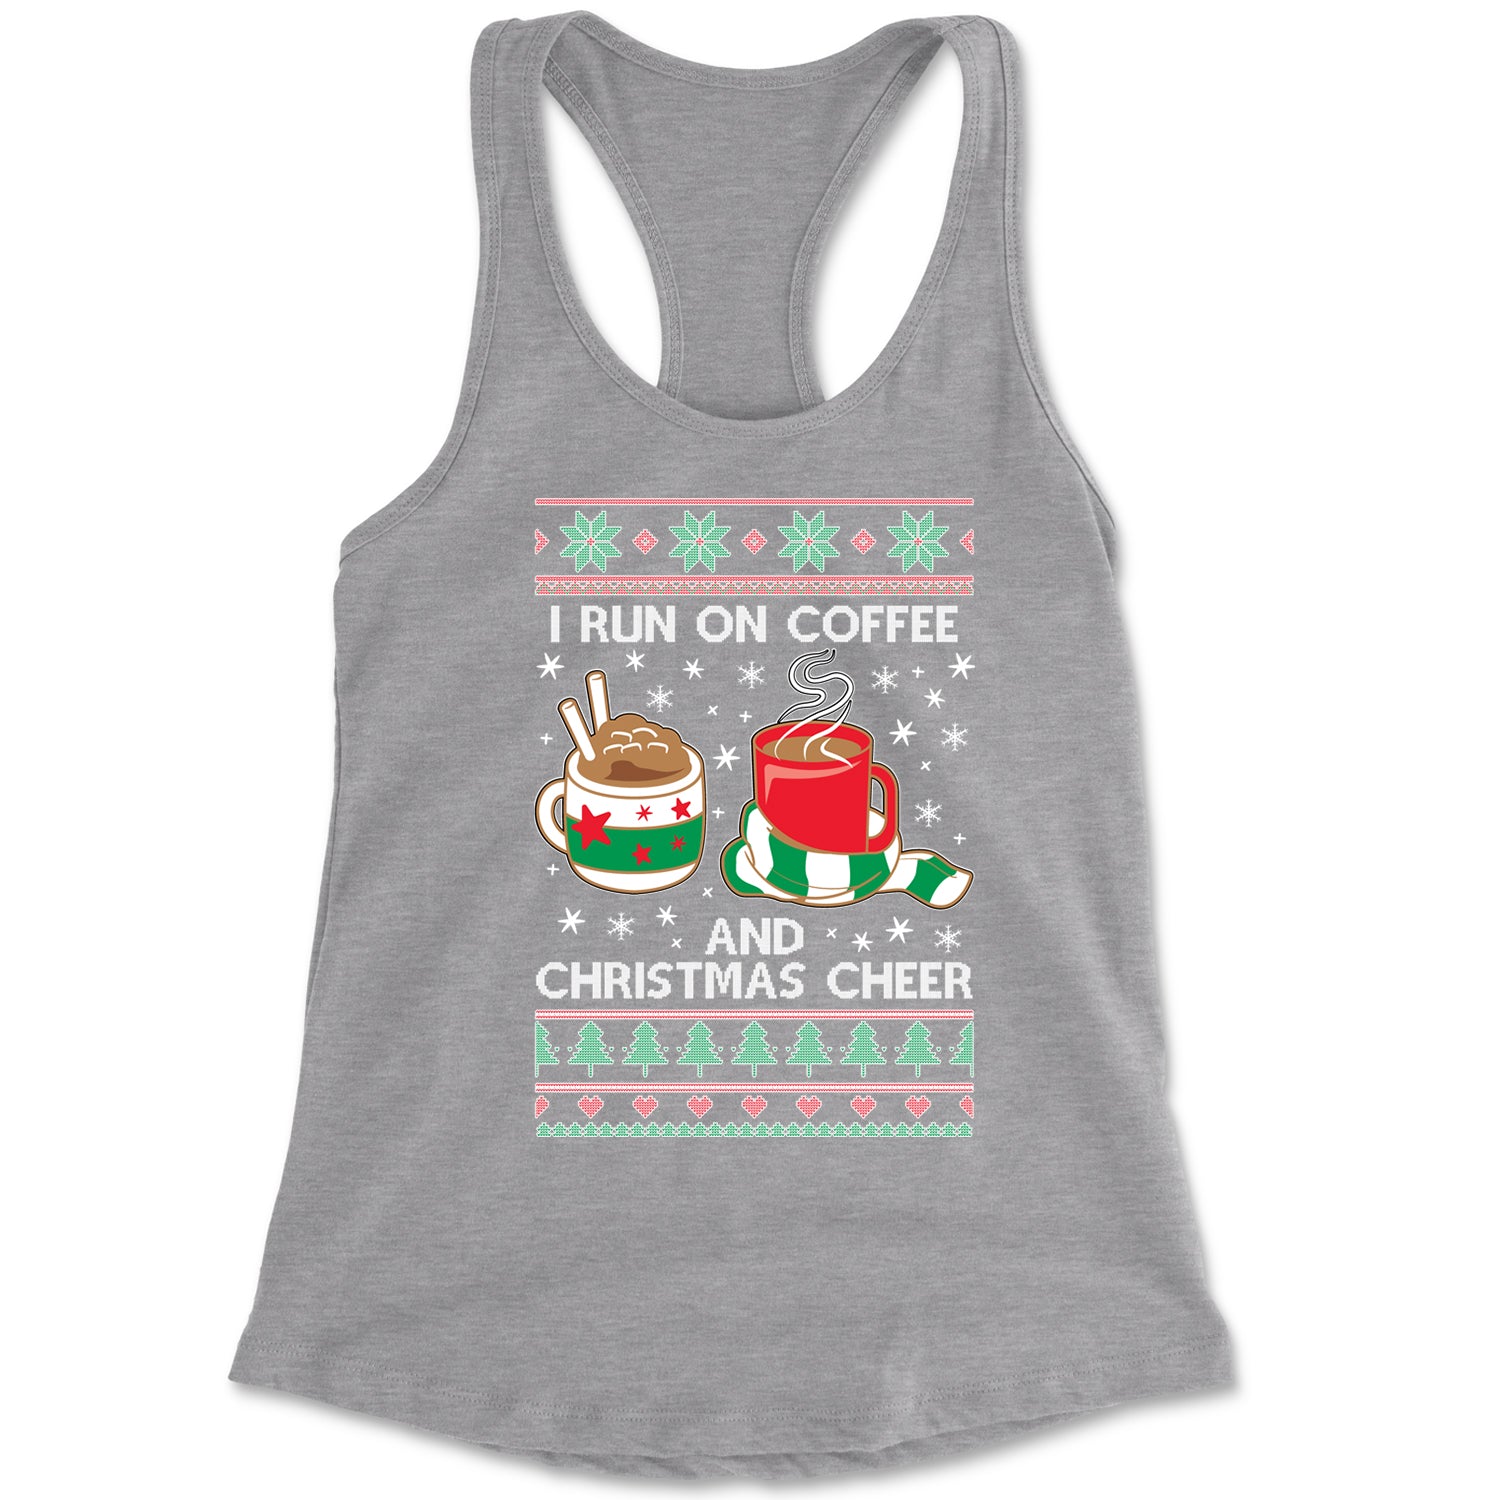 I Run On Coffee And Christmas Cheer Racerback Tank Top for Women christmas, sweater, sweatshirt, ugly by Expression Tees